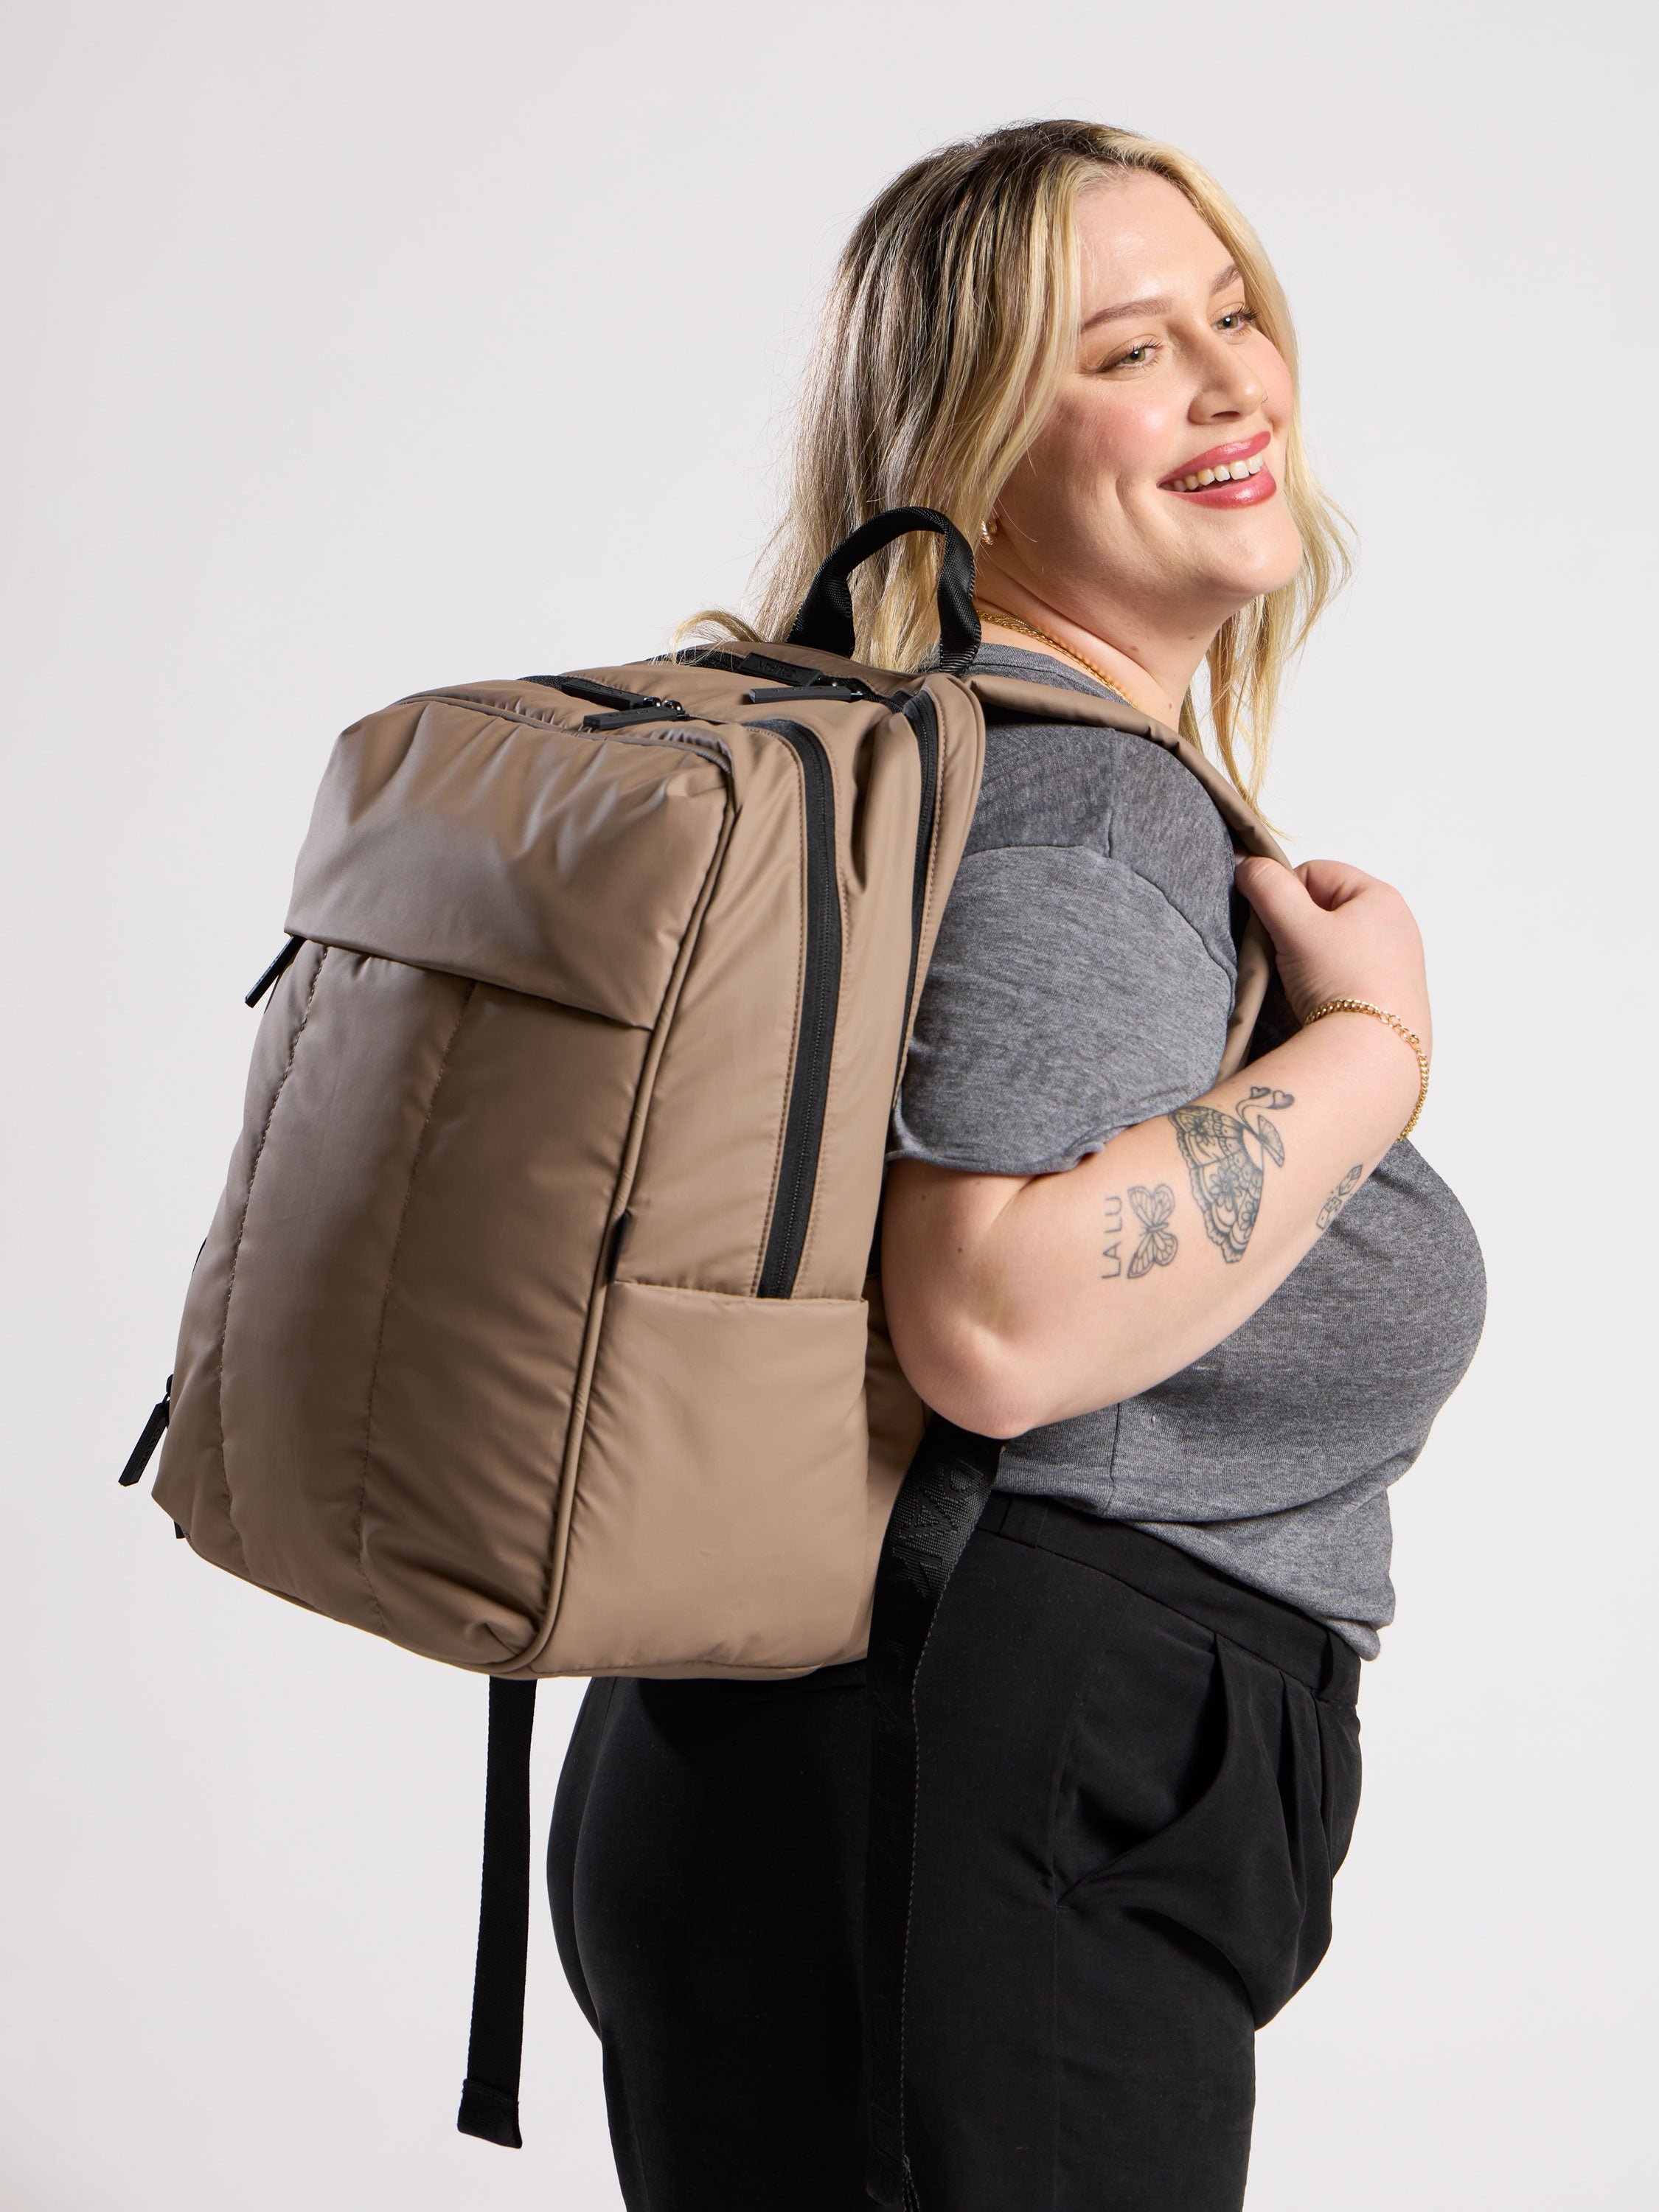 Model wearing luka laptop backpack for 17 inch laptop on back in brown